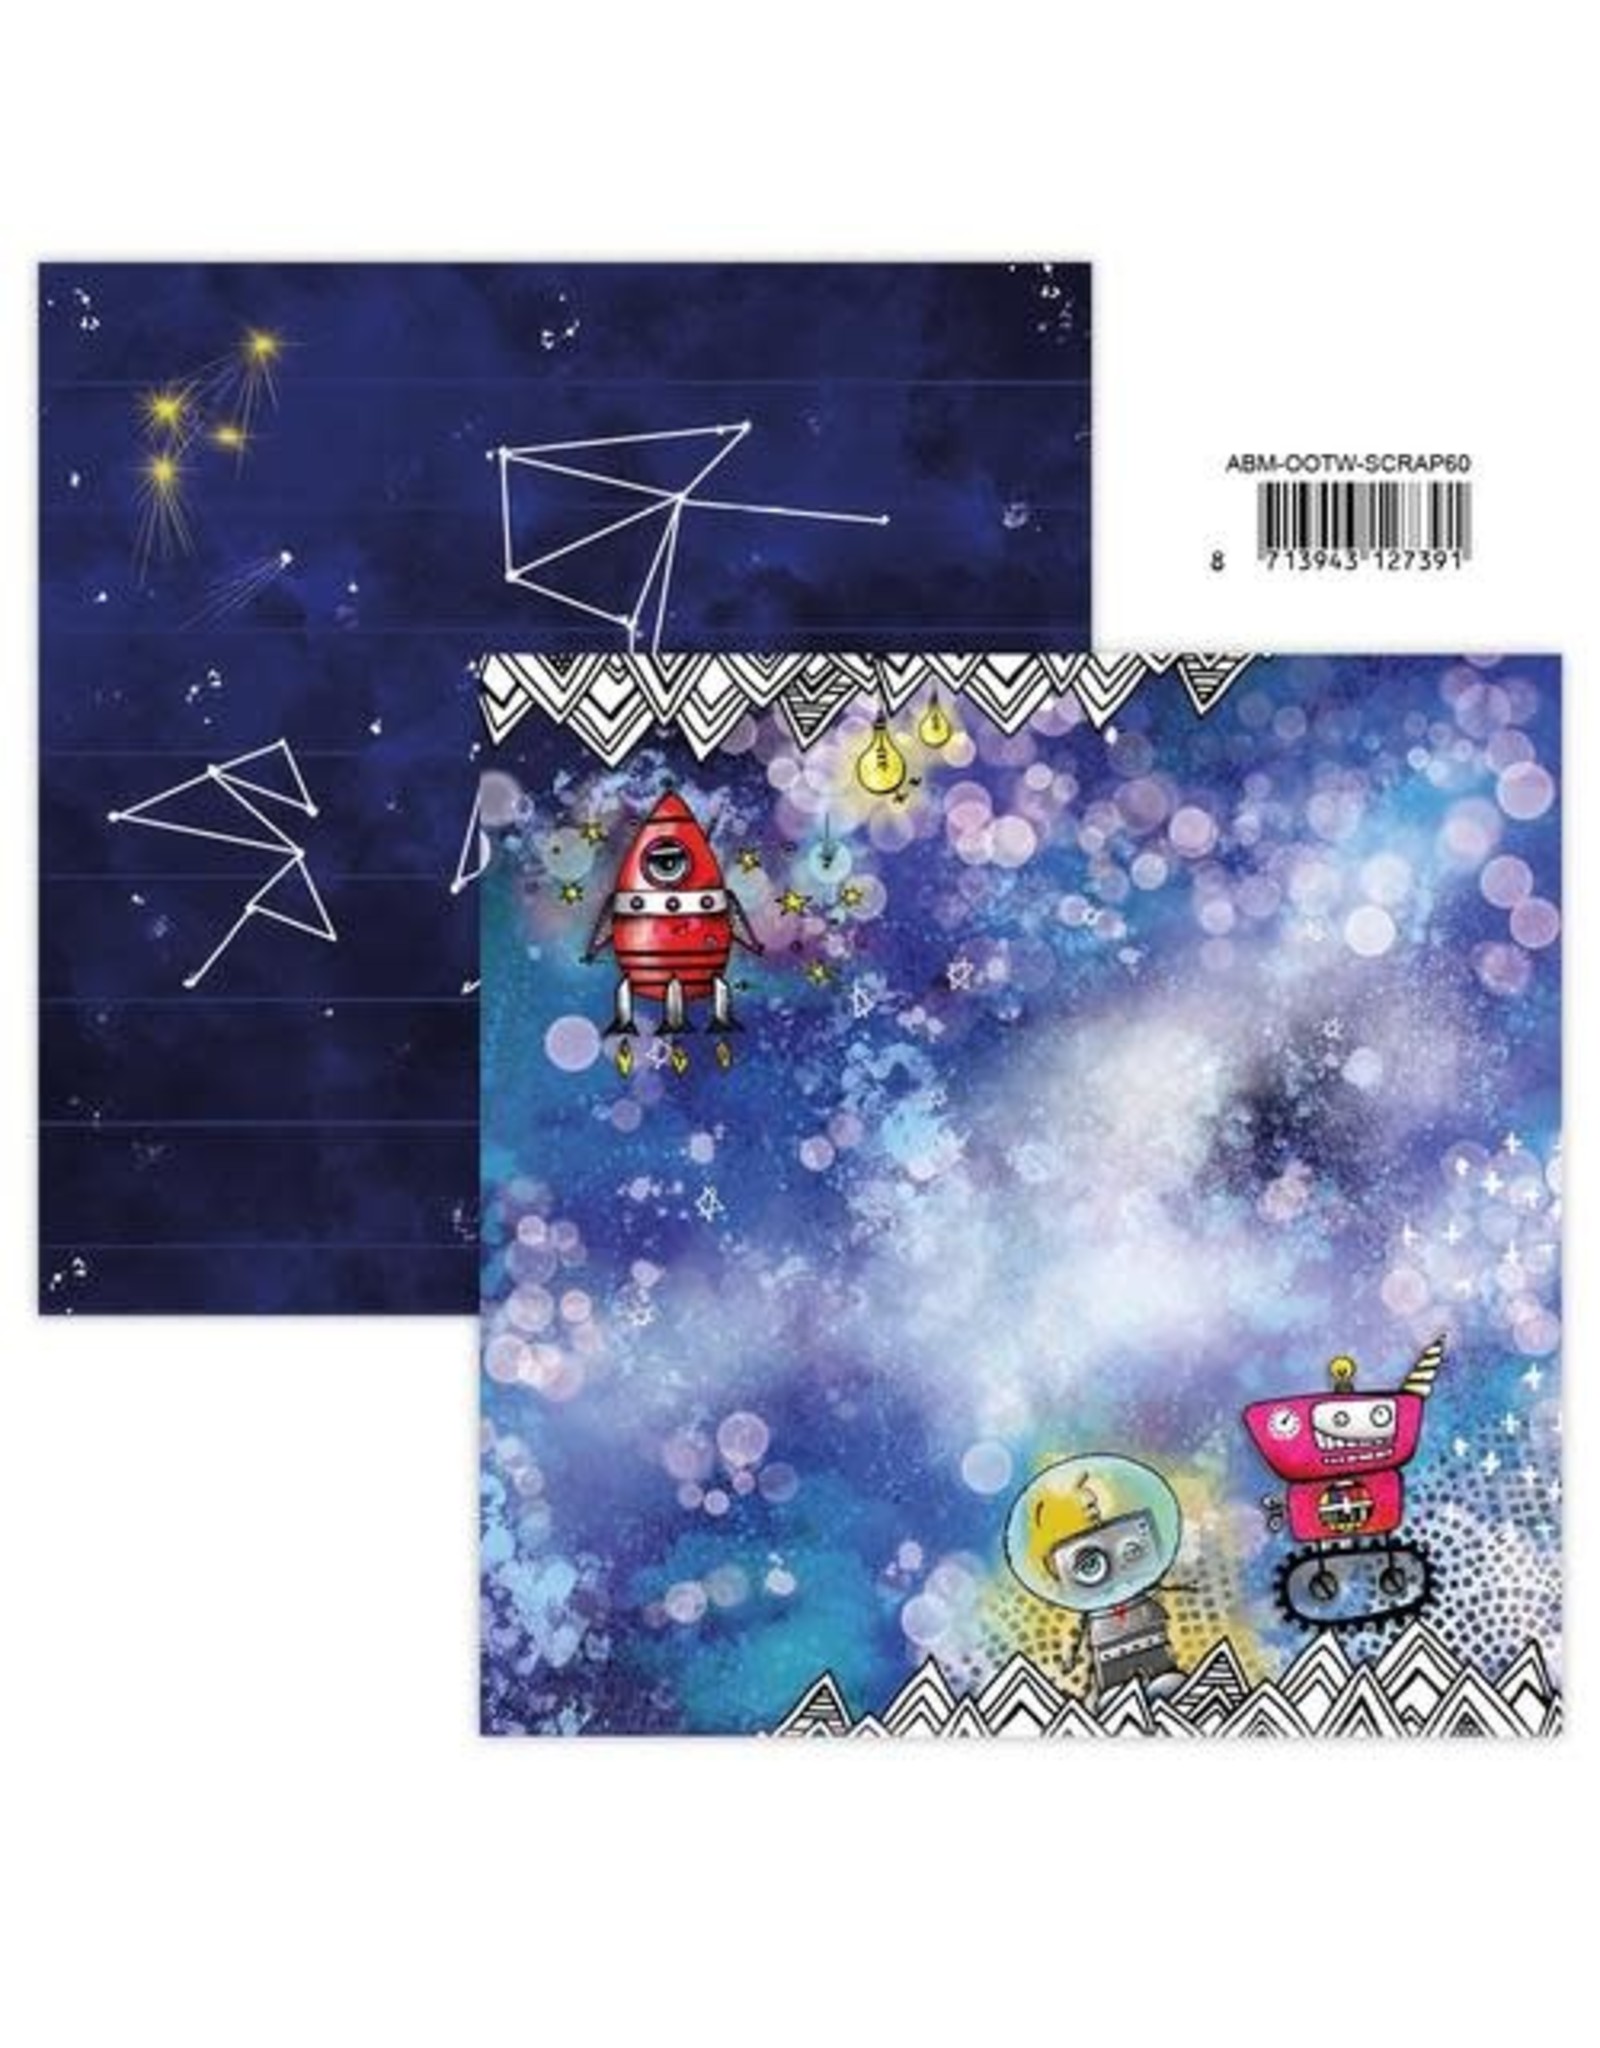 STUDIOLIGHT STUDIOLIGHT ART BY MARLENE OUT OF THIS WORLD #60 12x12 CARDSTOCK